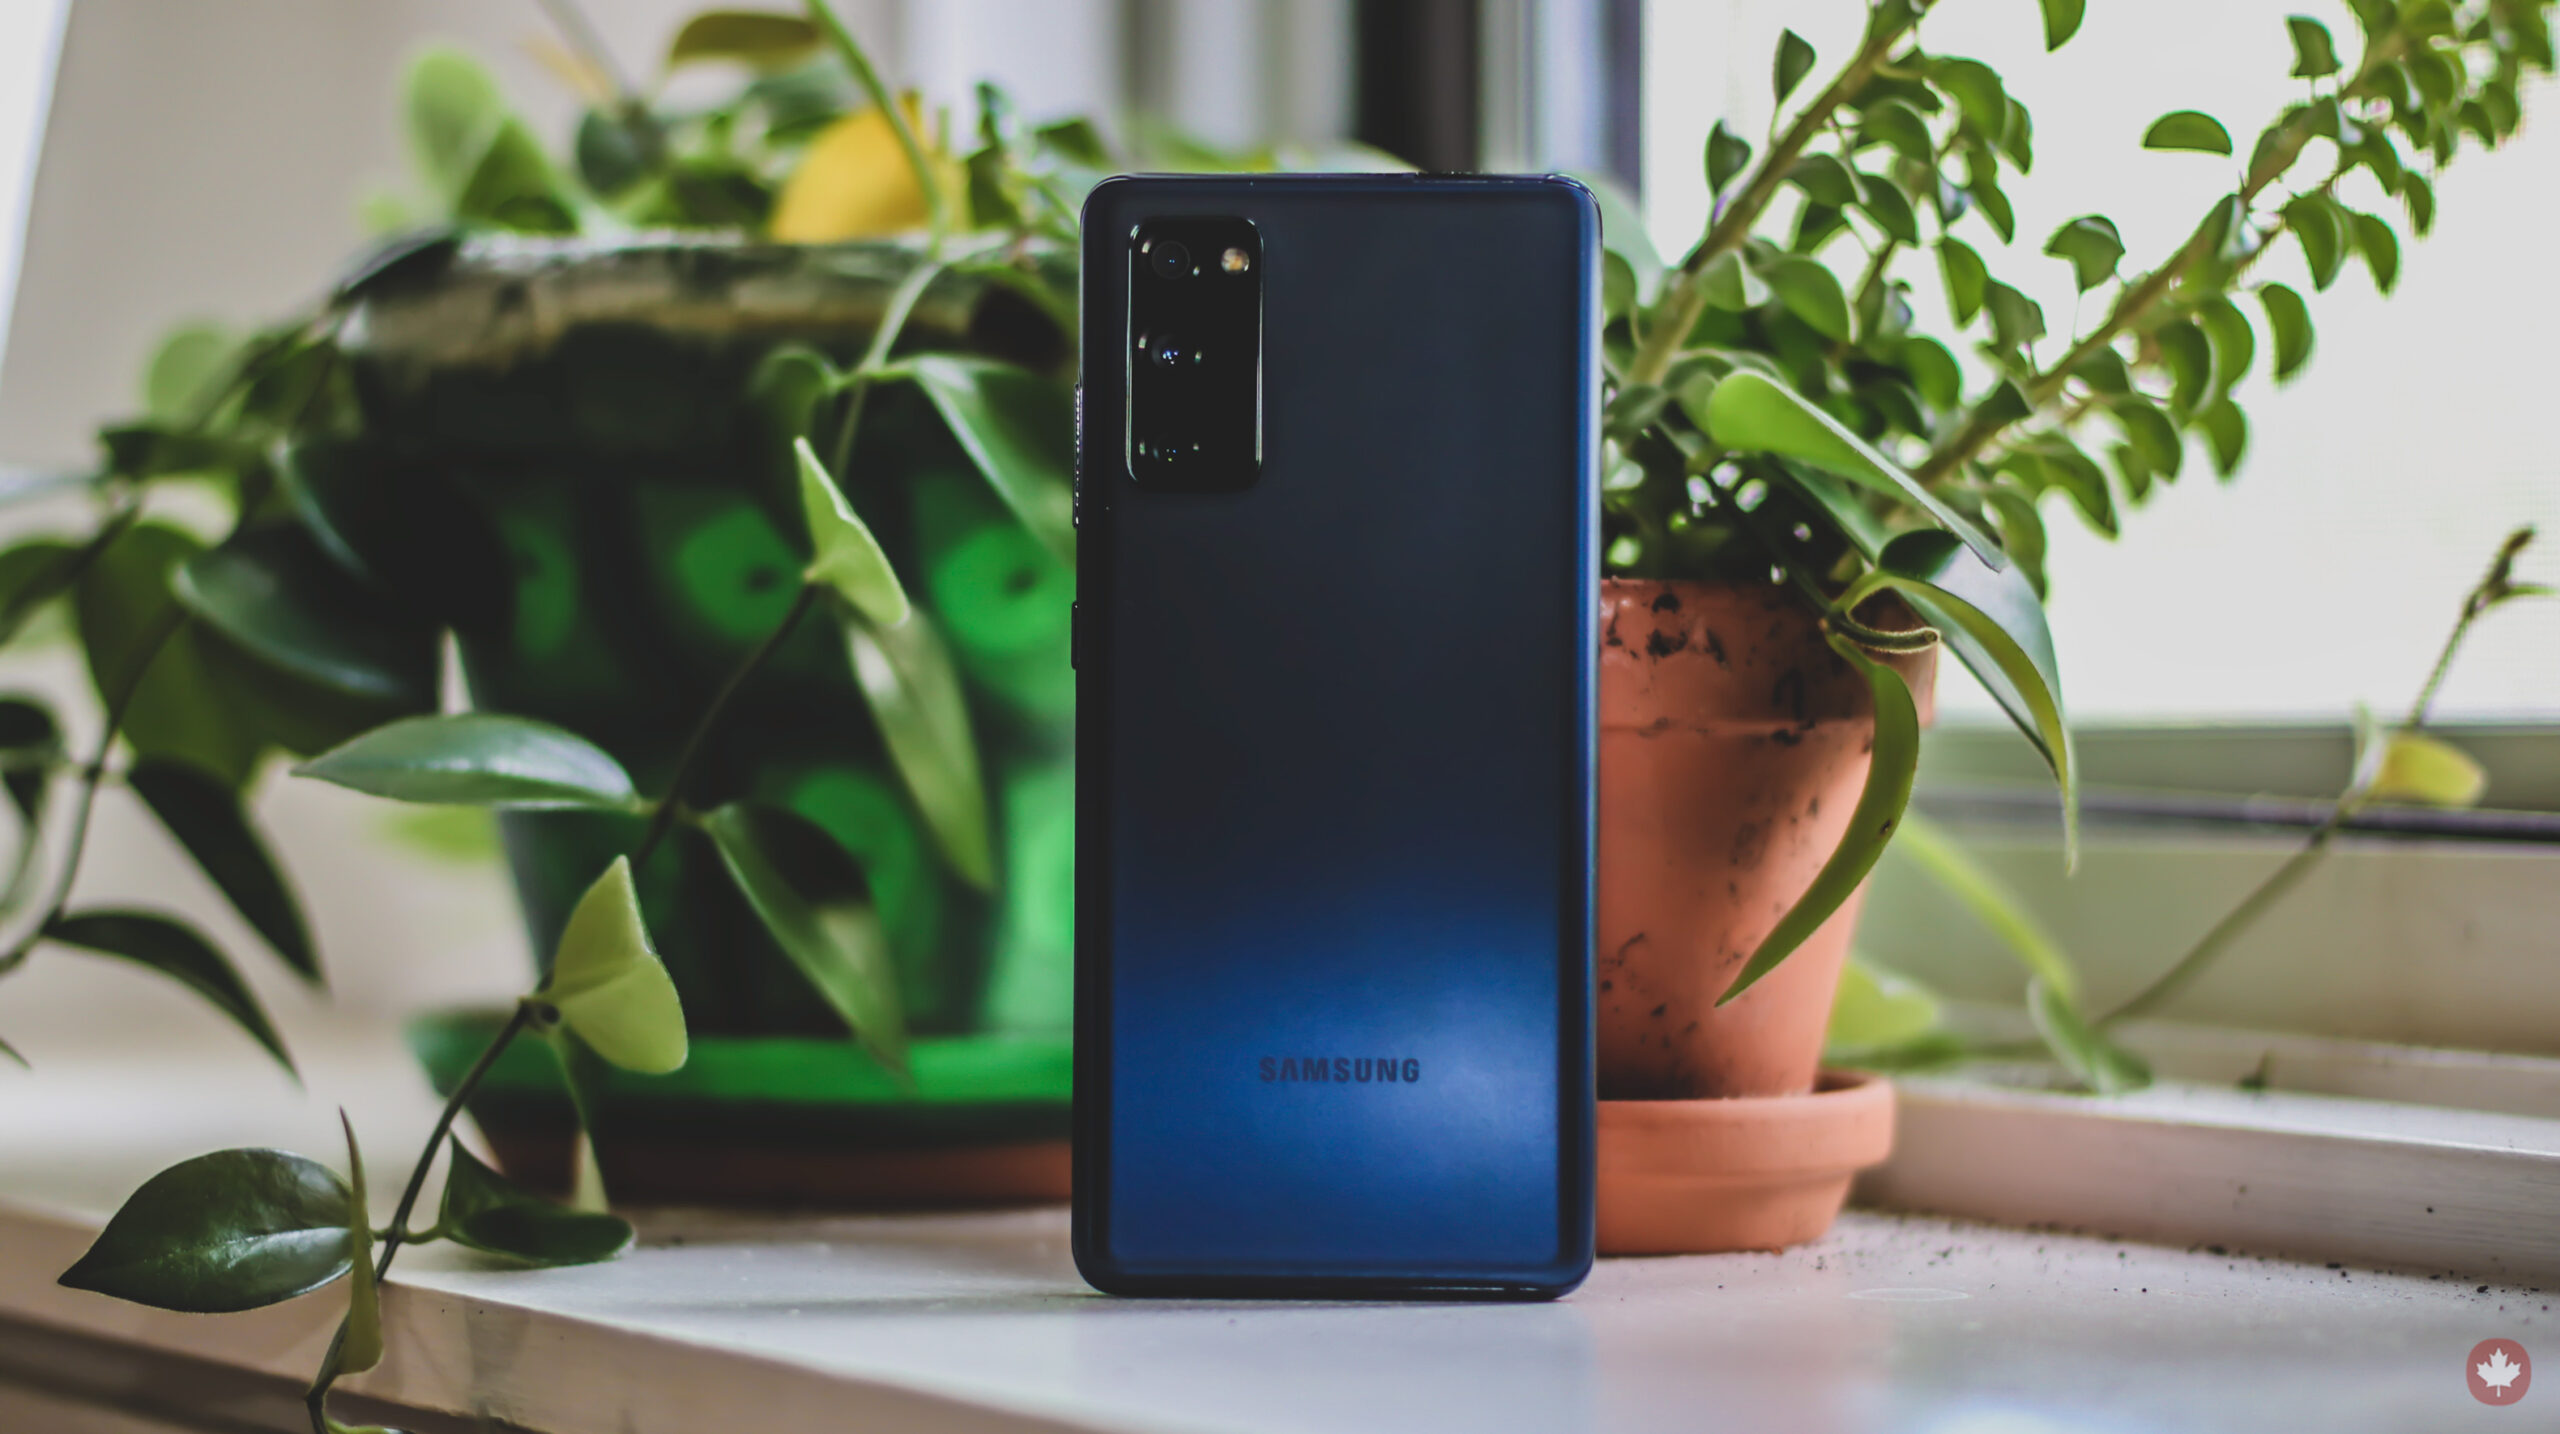 Samsung Galaxy S20 FE review: A feature-packed flagship choice